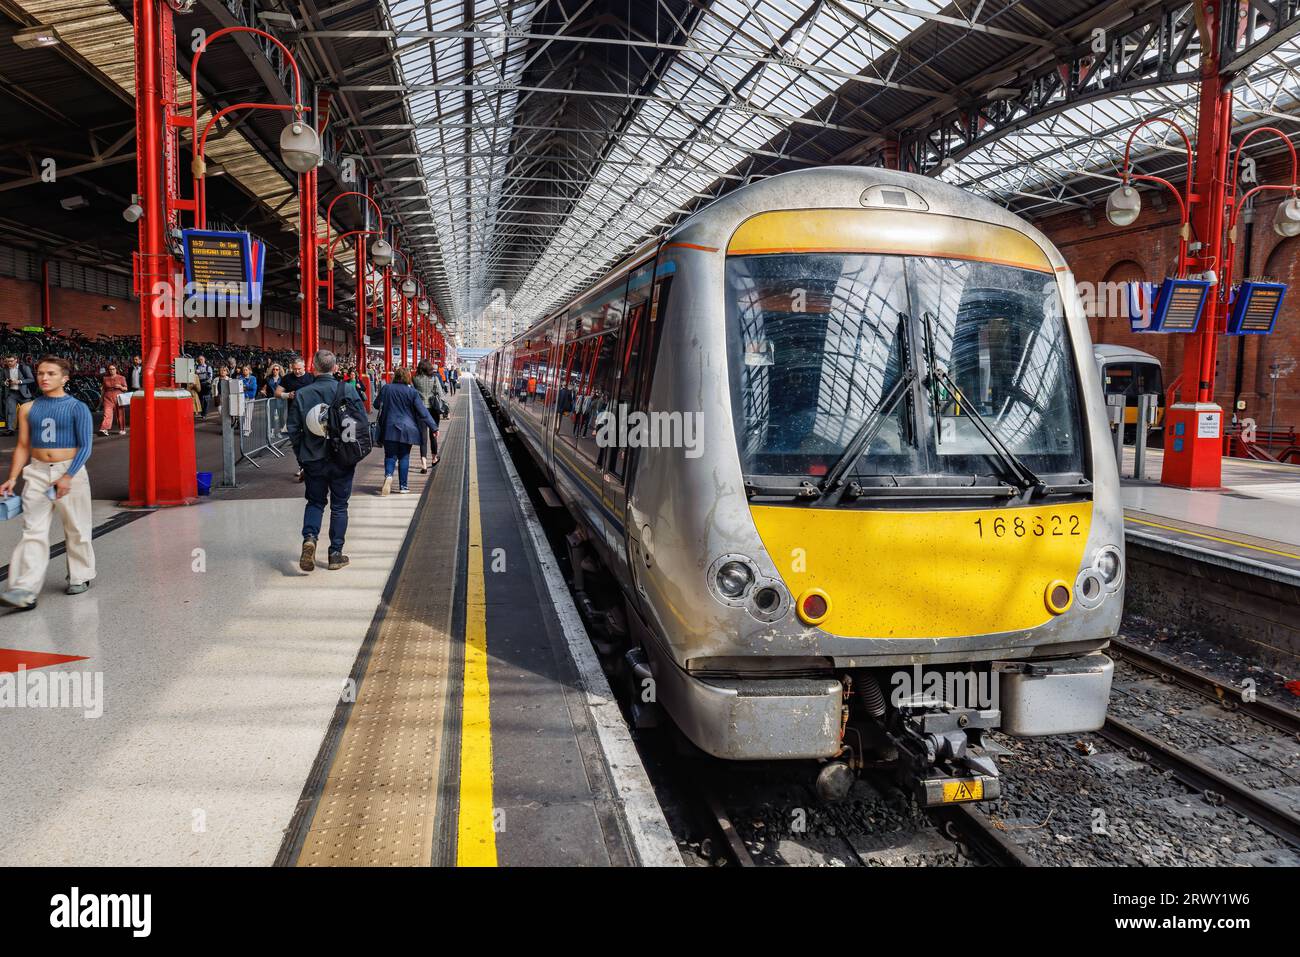 London, UK - May 18, 2023:  A commuter train at the railway platform about to leave the station Stock Photo